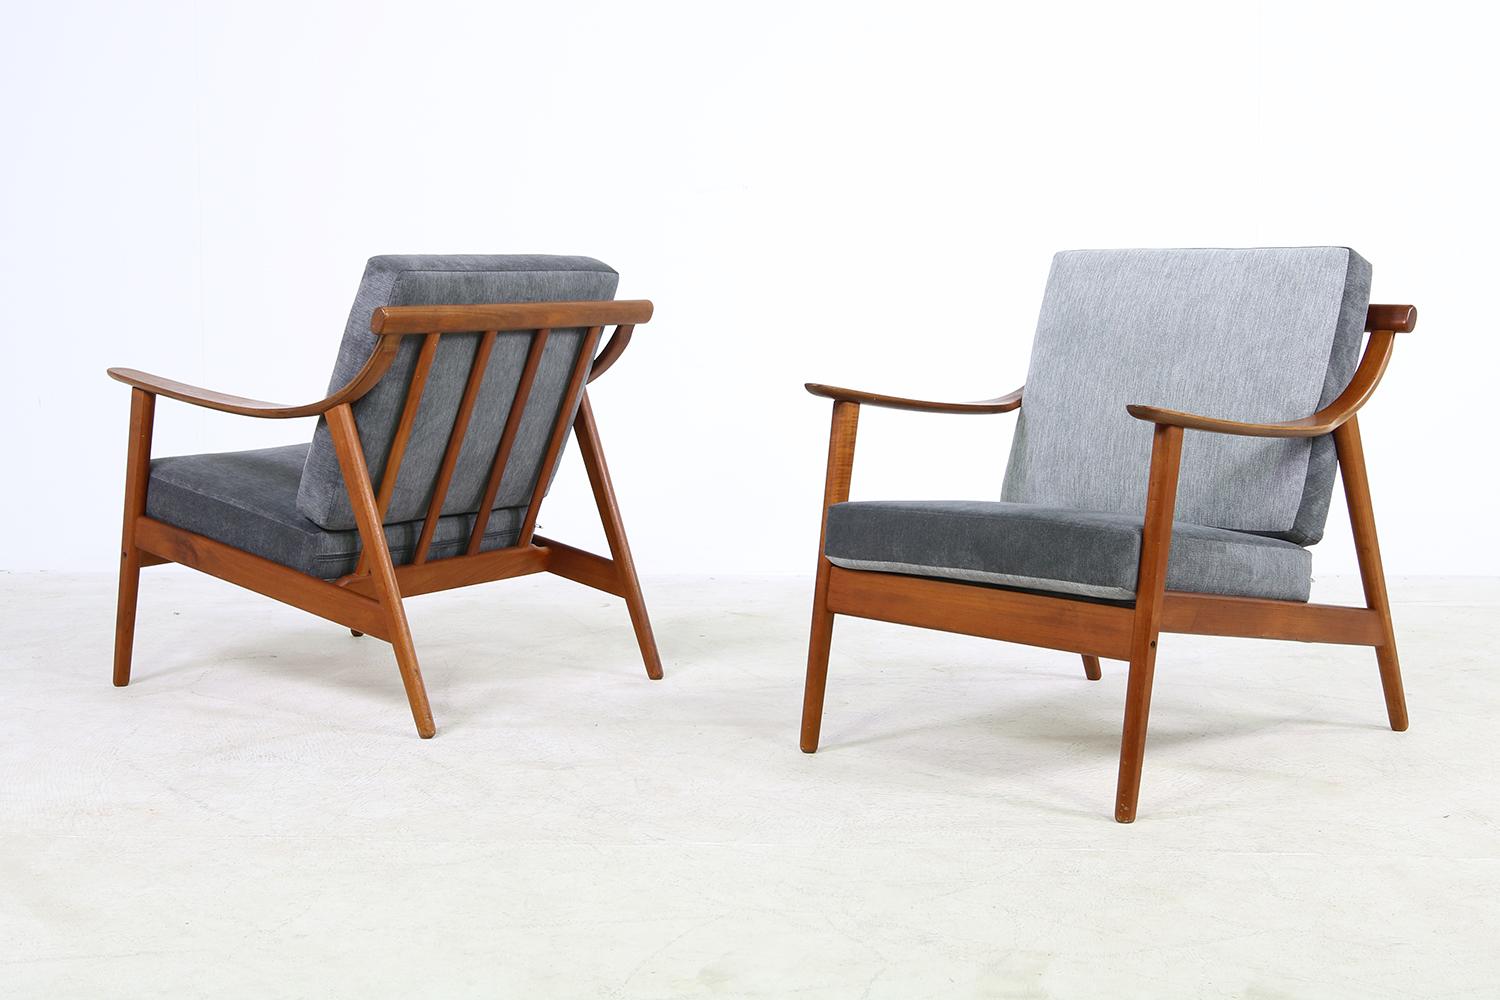 Beautiful pair of 1960s Arne Hovmand Olsen teak easy chairs, for Mogens Koch Mod. MK 119 rare pieces, Made in Denmark, new upholstery in high quality woven fabric, in dark grey and grey. Overall a fantastic condition. The seats and the back cushions